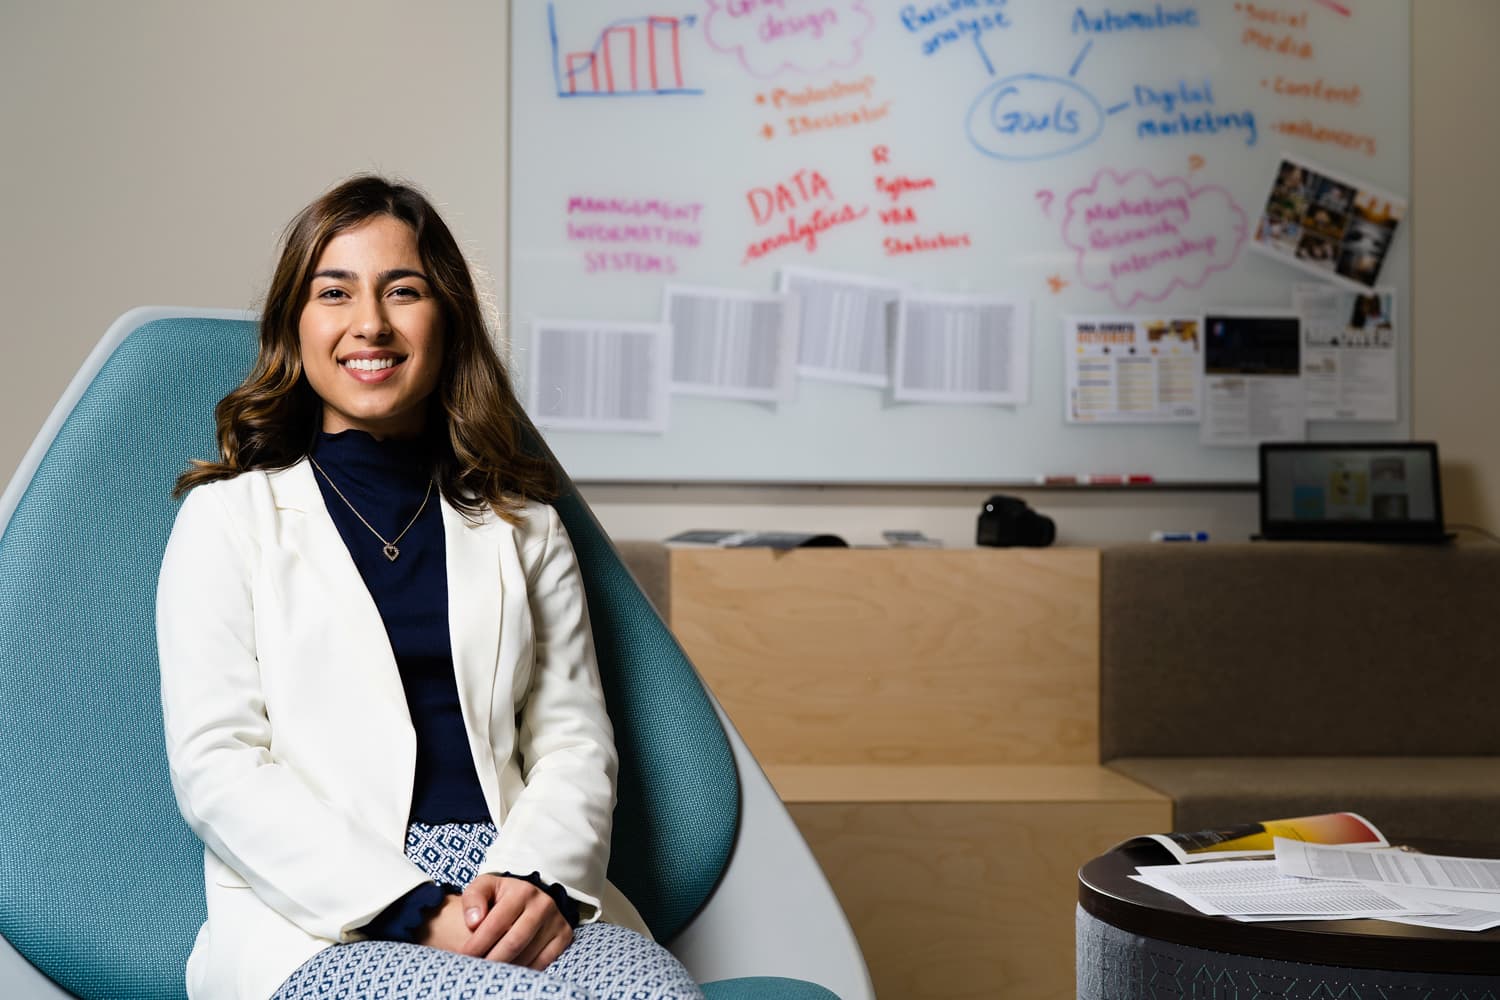  student in white coat sitting in blue chair in front of whiteboard 